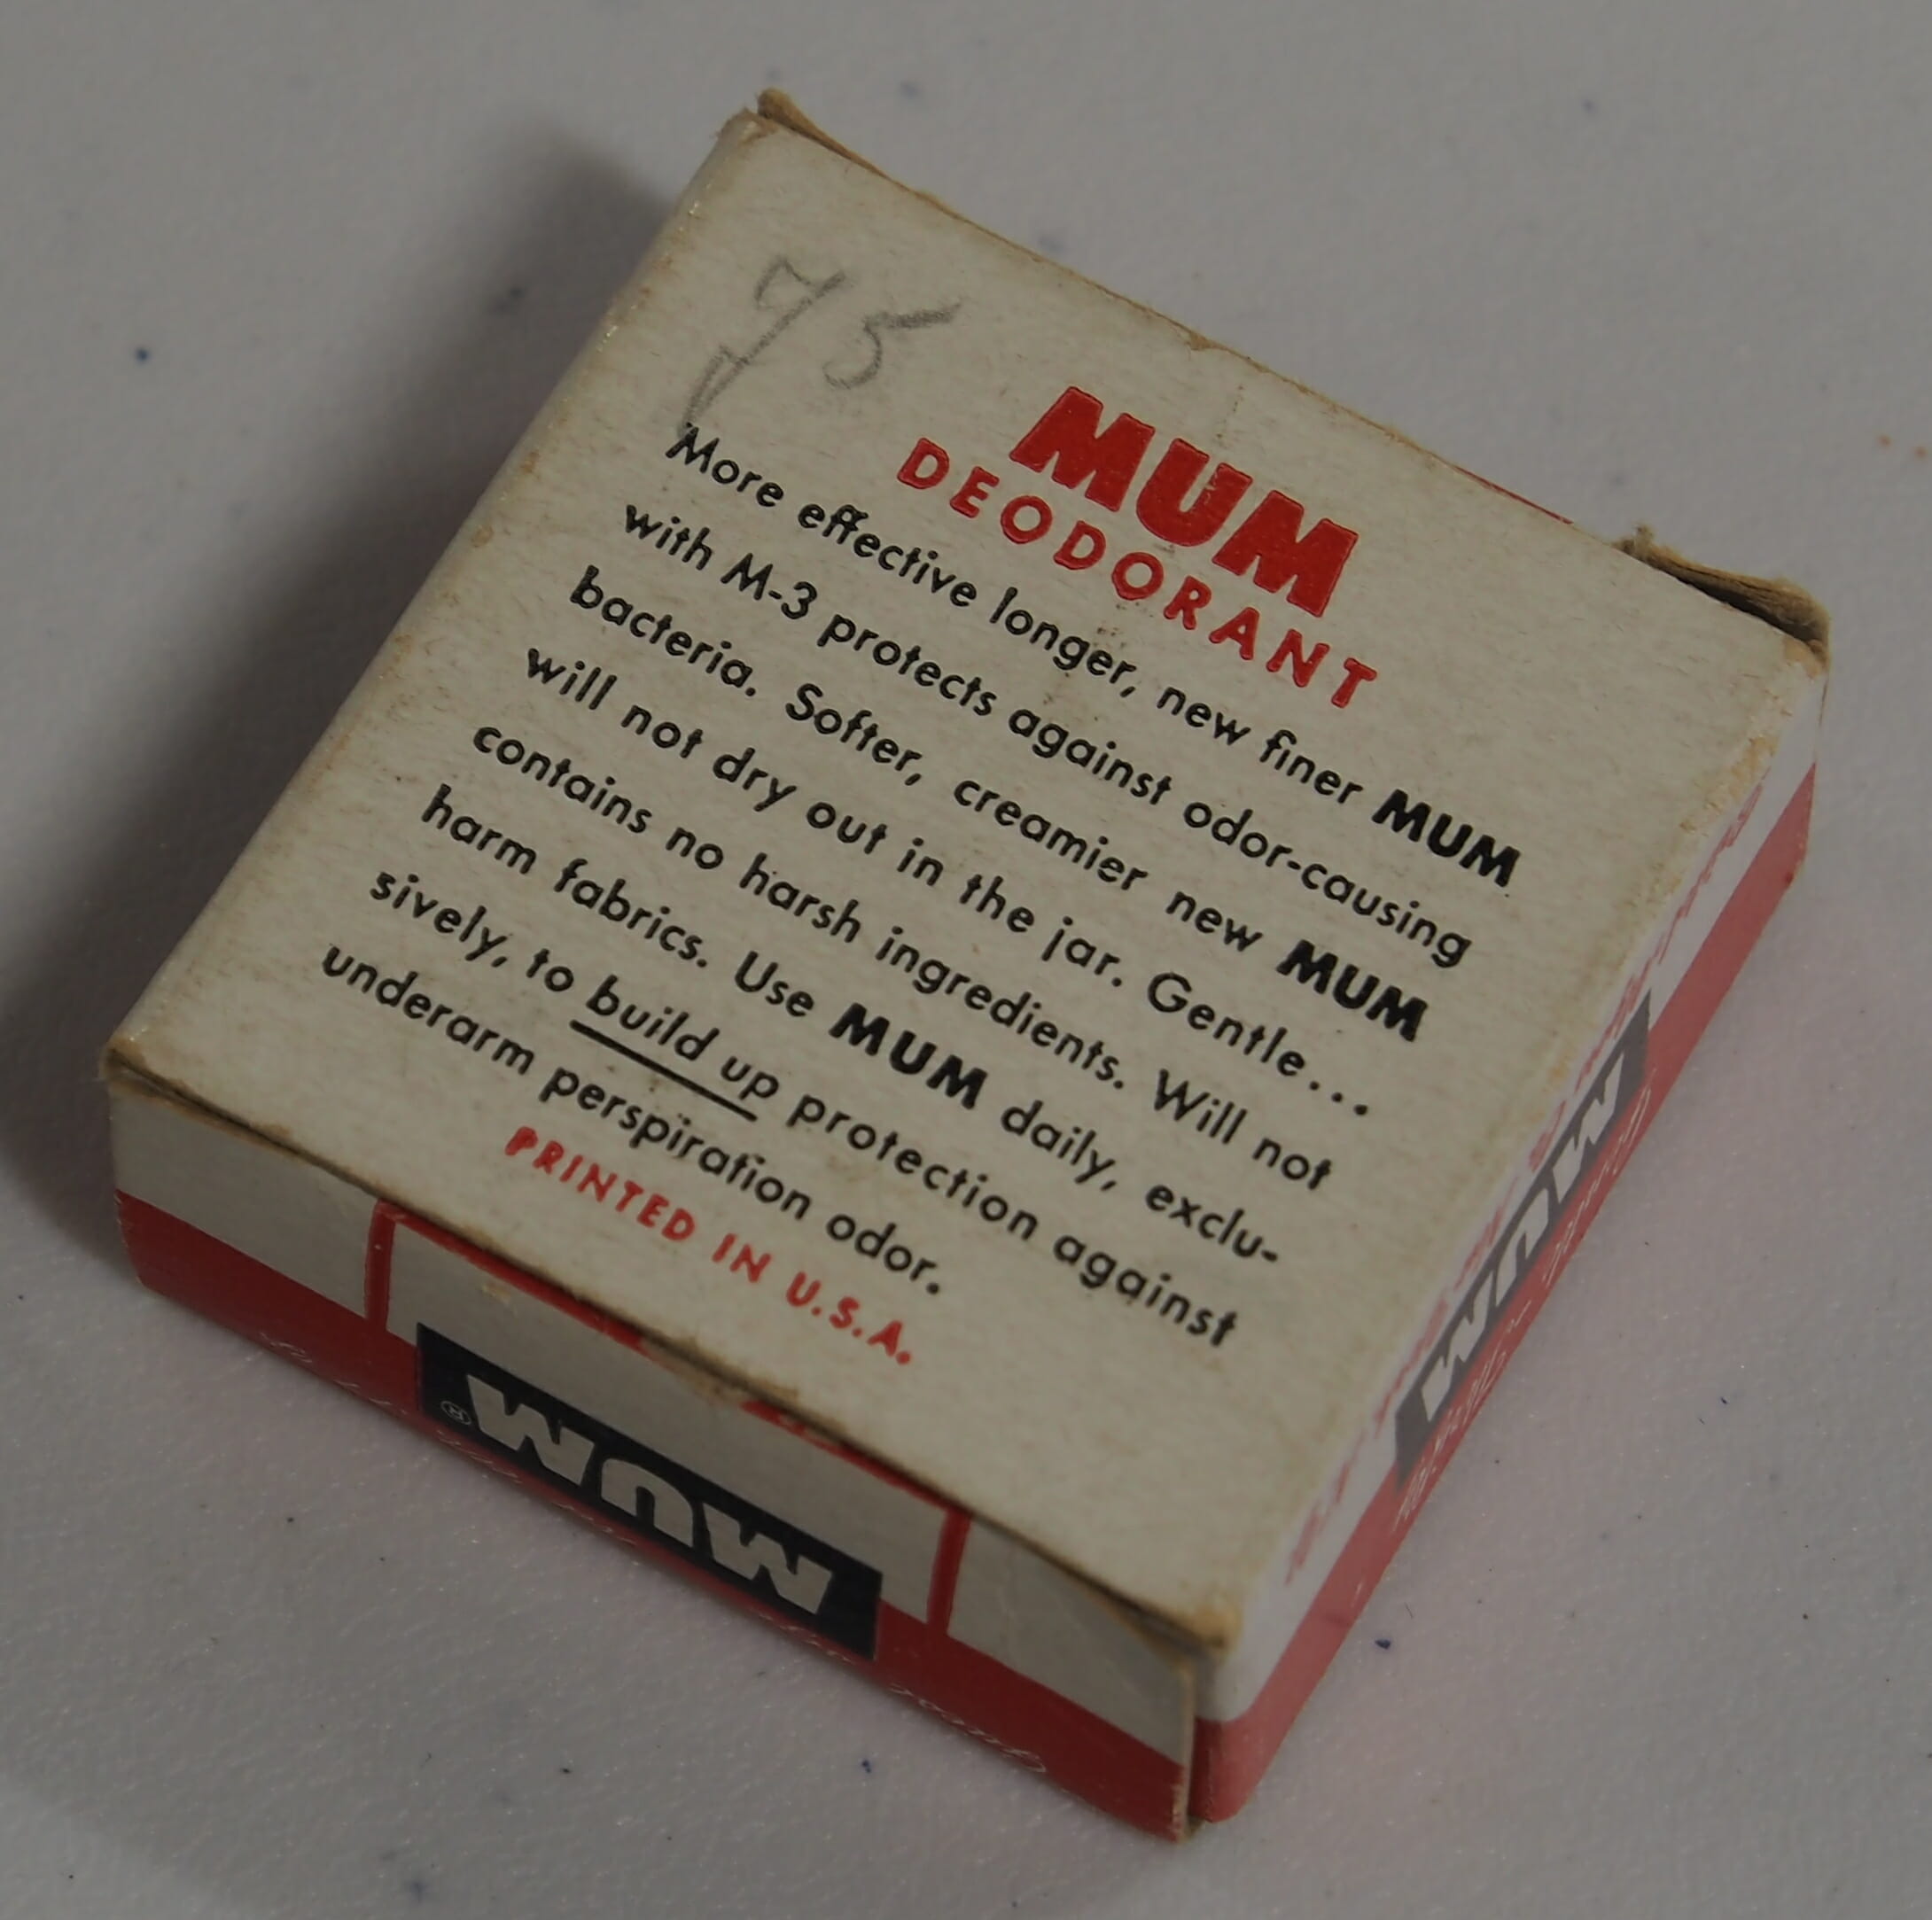 The back of a vintage package of Mum deodorant, explaining its uses.